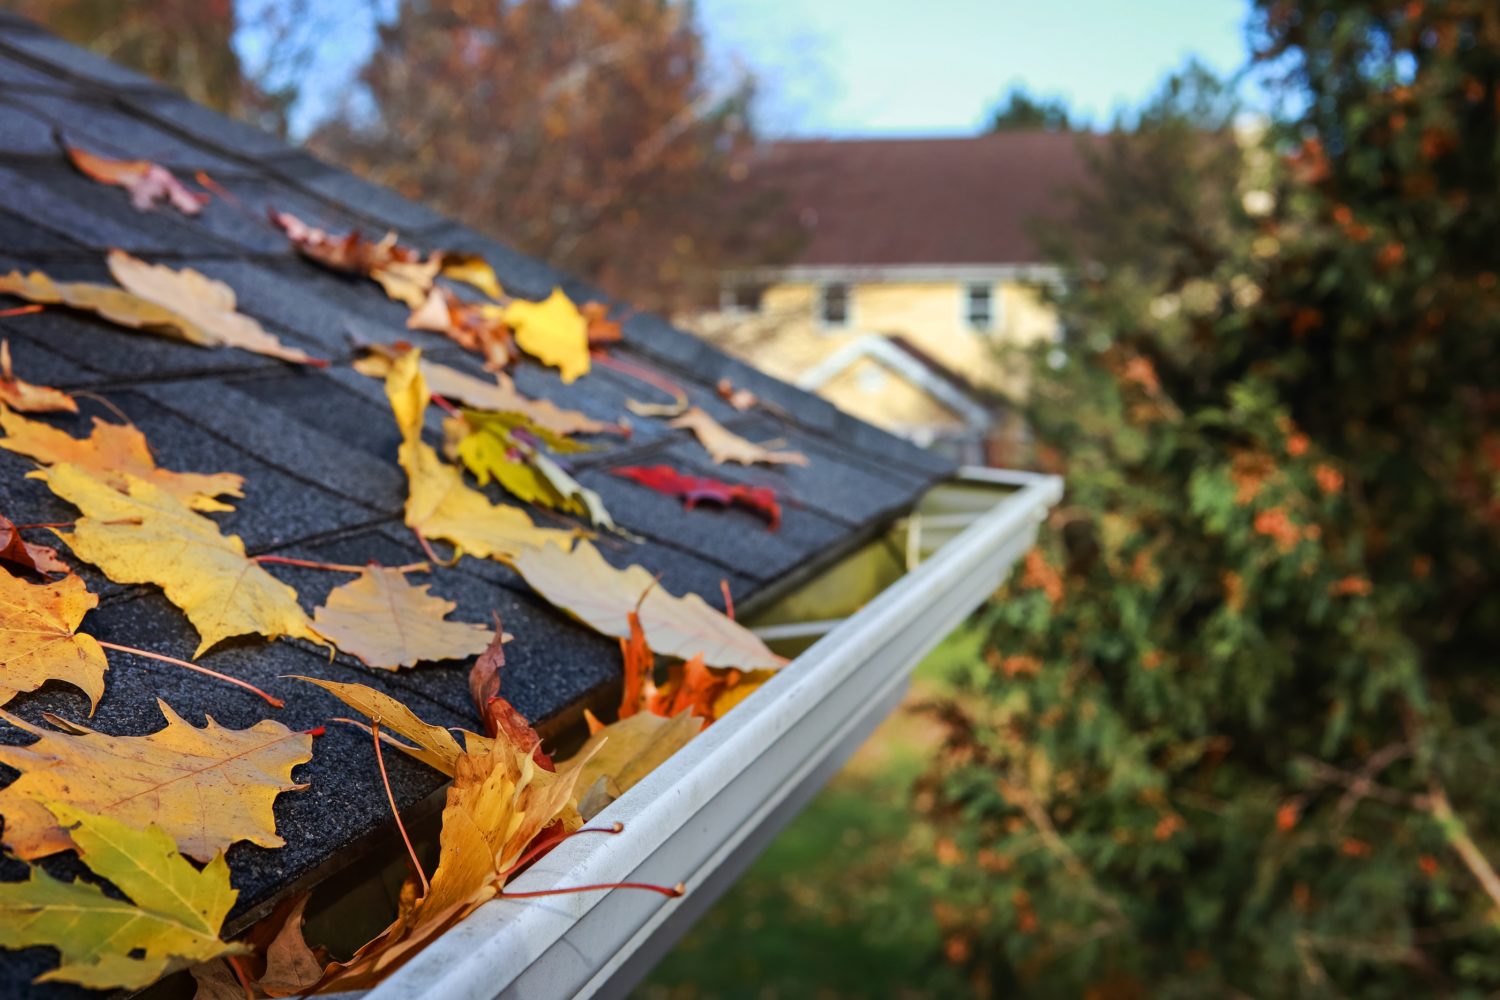 Gutter and roof cleaning services in Noblesville, IN.